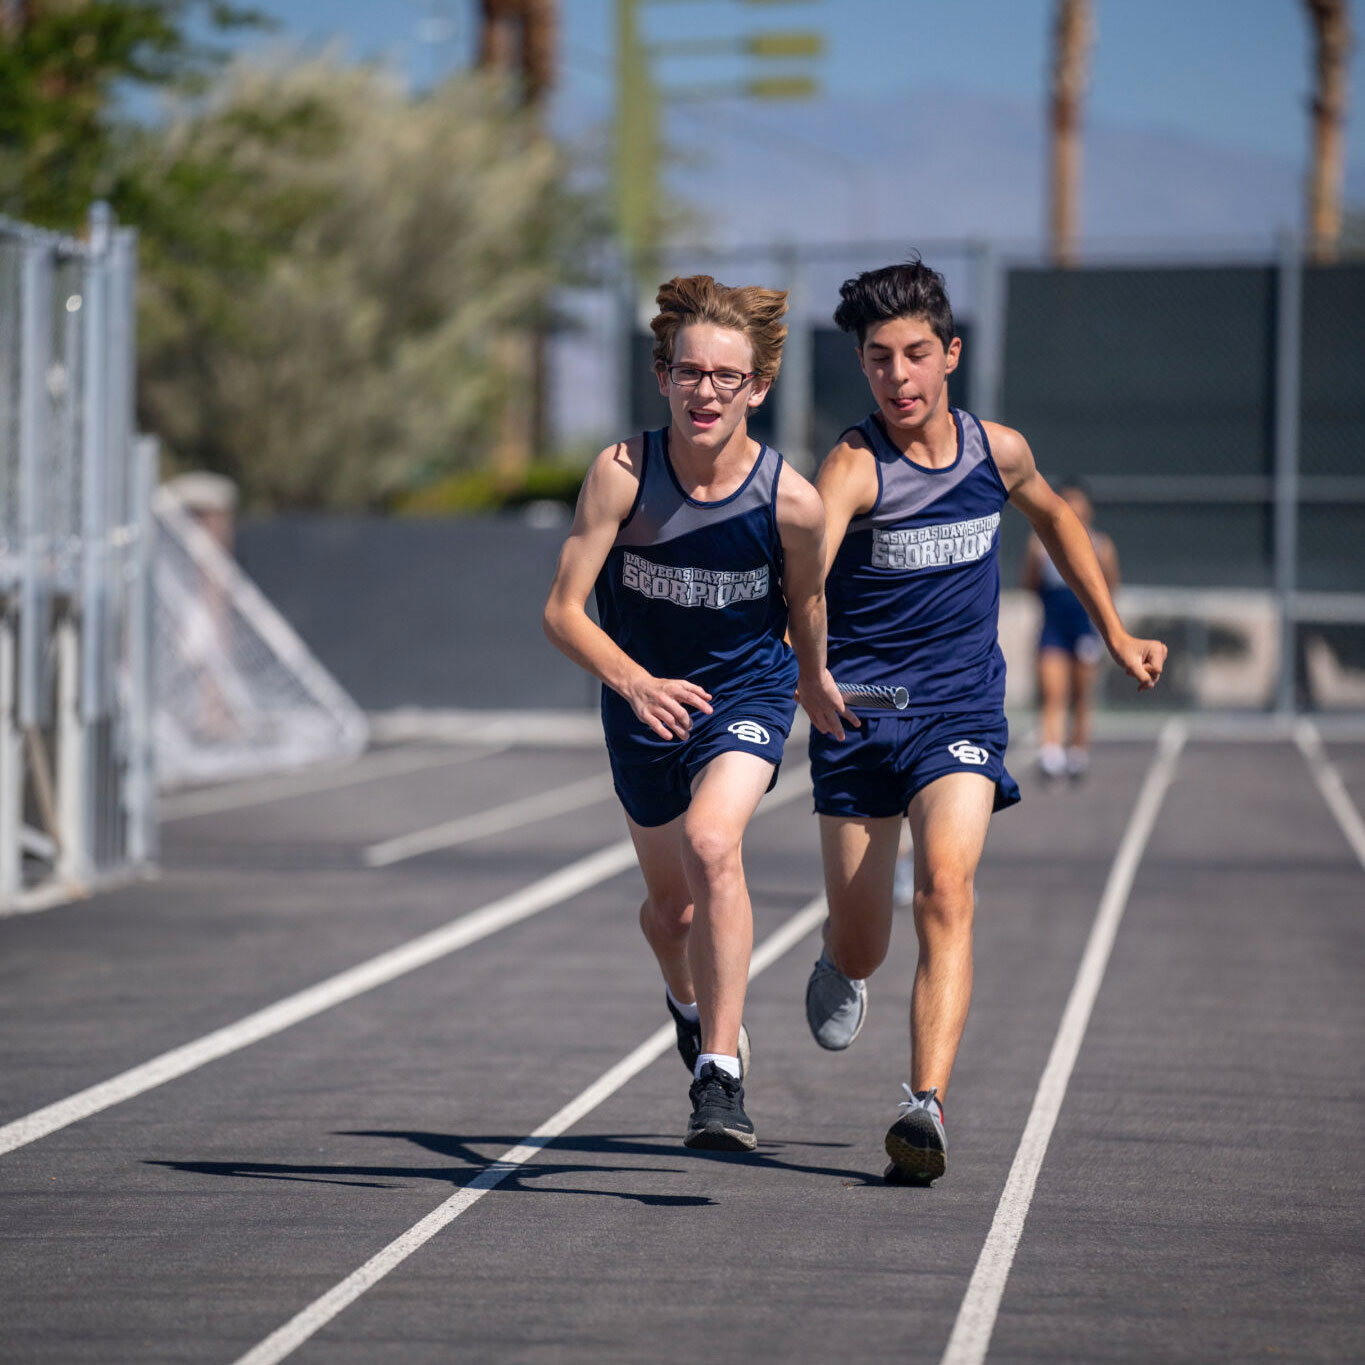 a student in a blue track uniform passing a baton to another track runner during a relay race at a school track